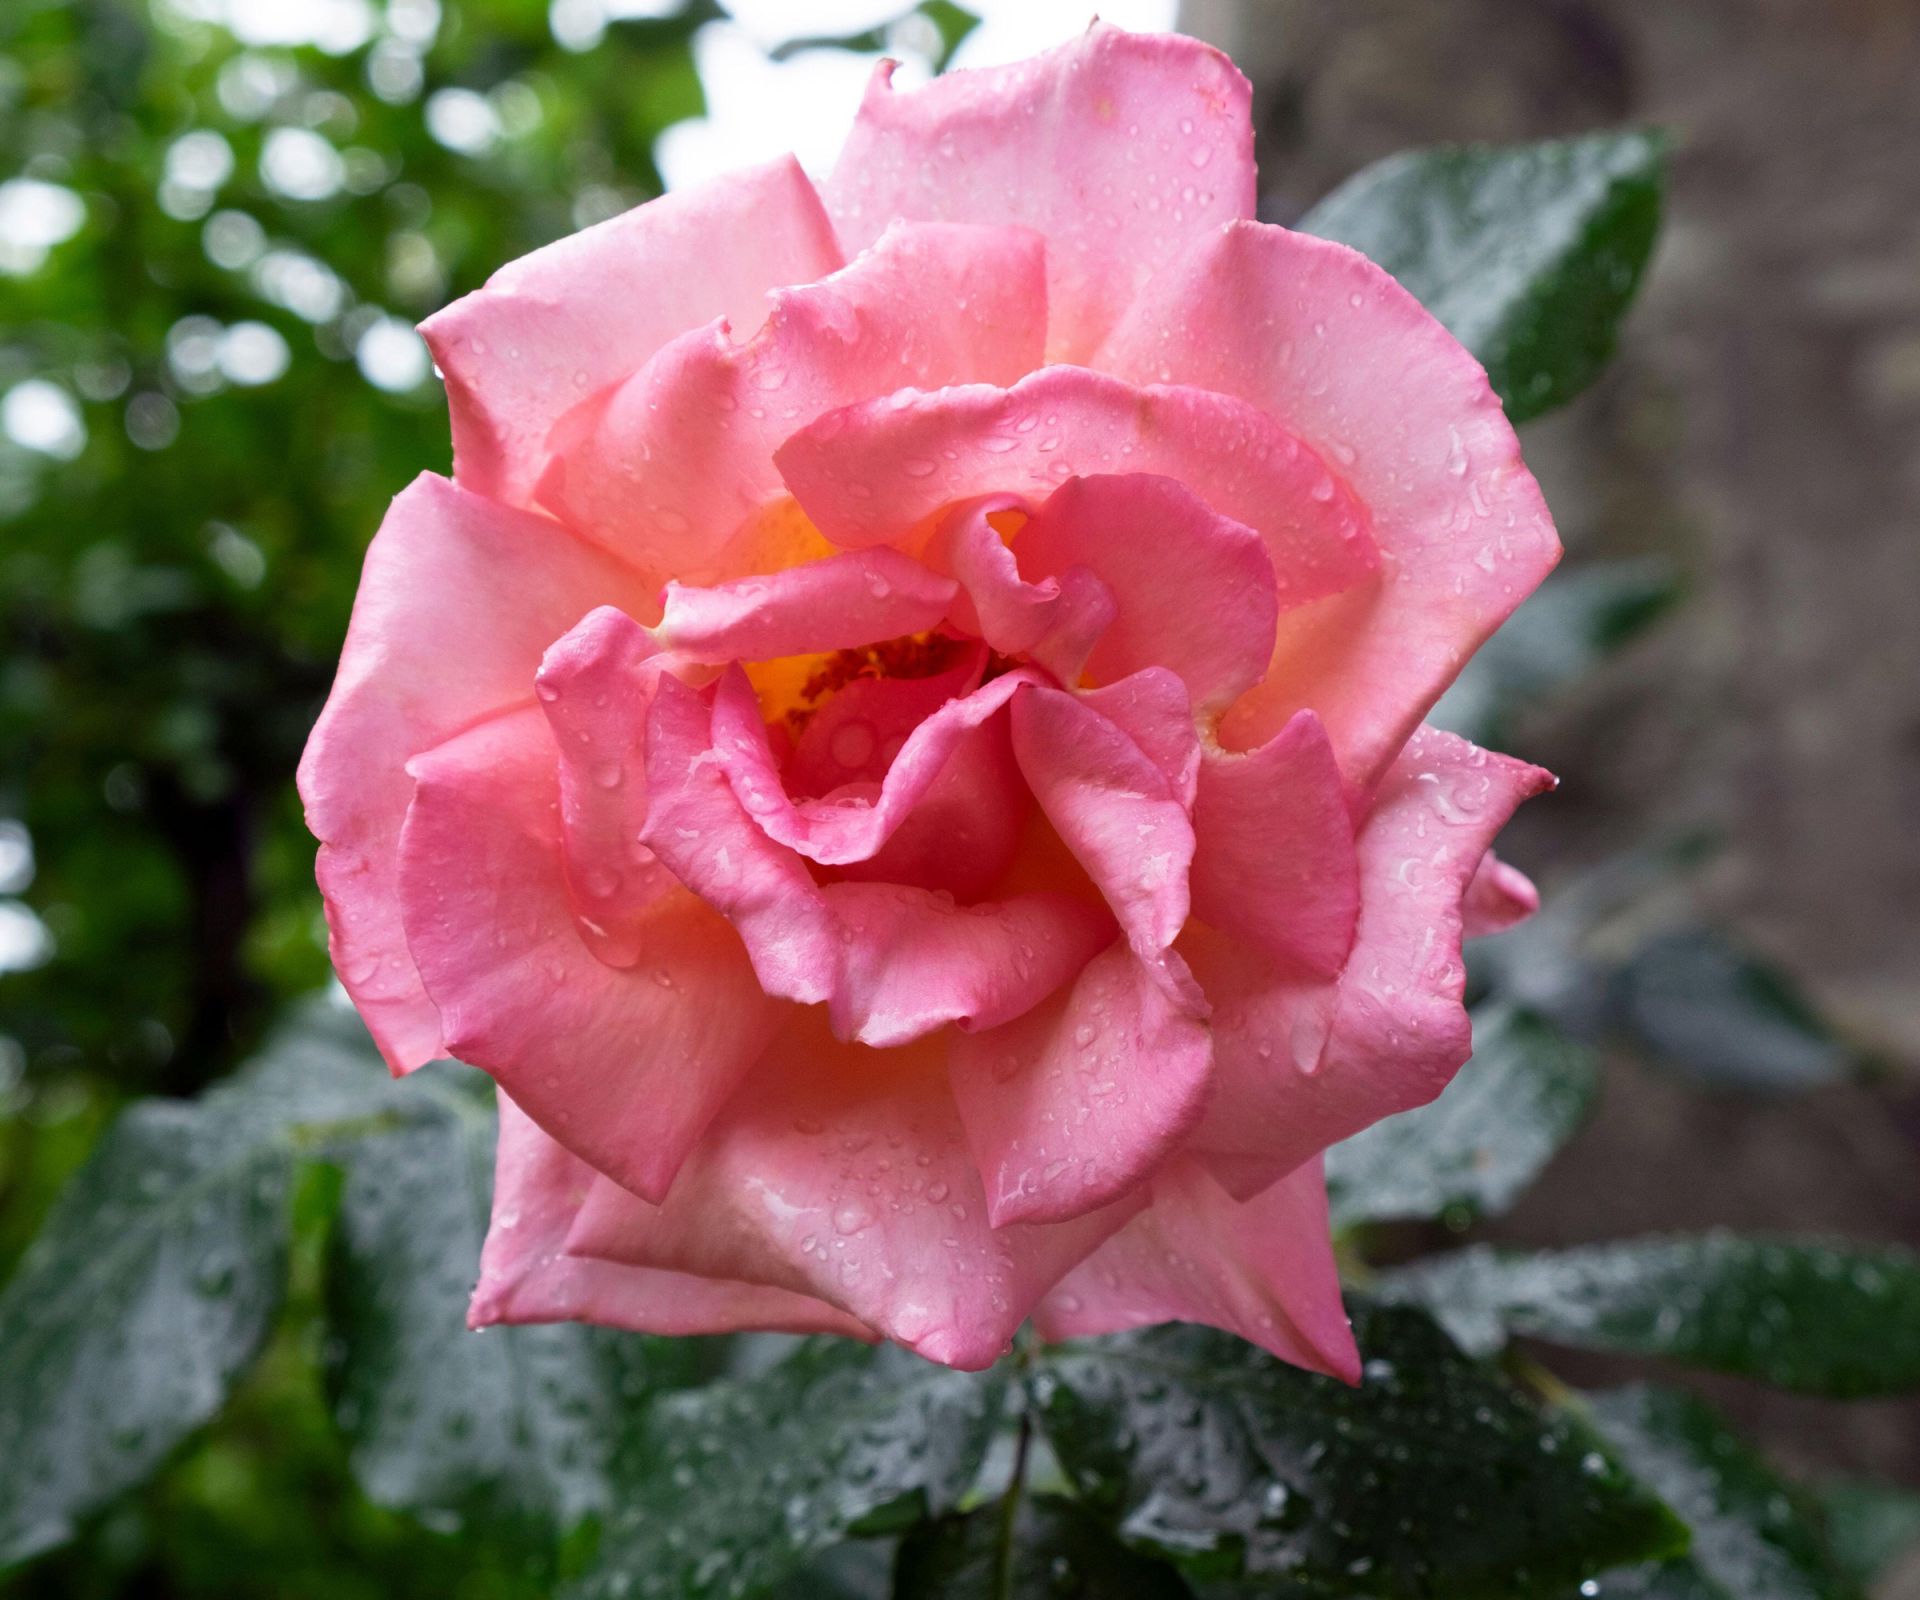 Best climbing roses – 12 charming varieties to add height, scent and color